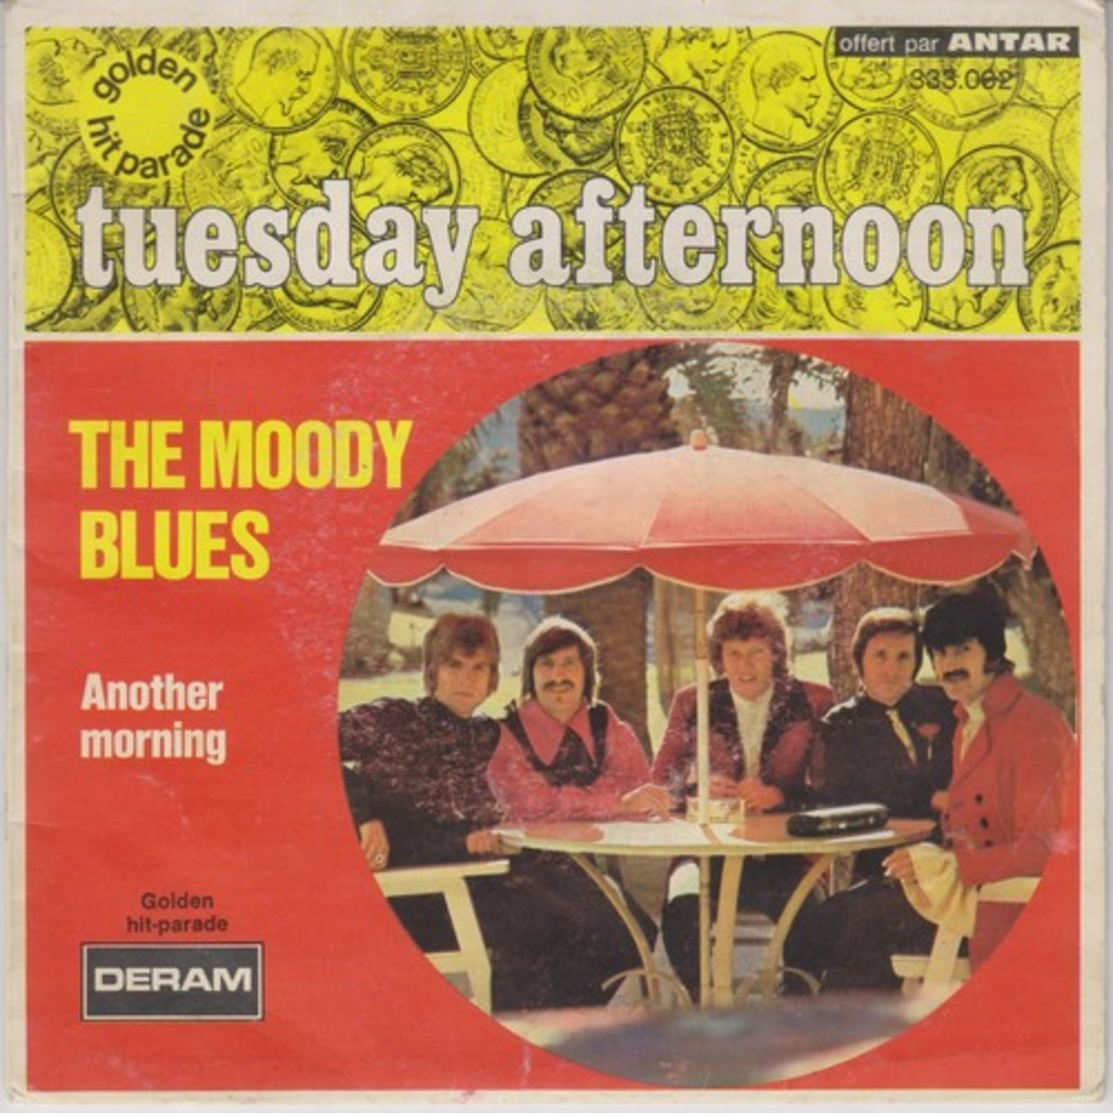 THE MOODY BLUES - TUESDAY AFTERNOON/ANOTHER MORNING - Rock